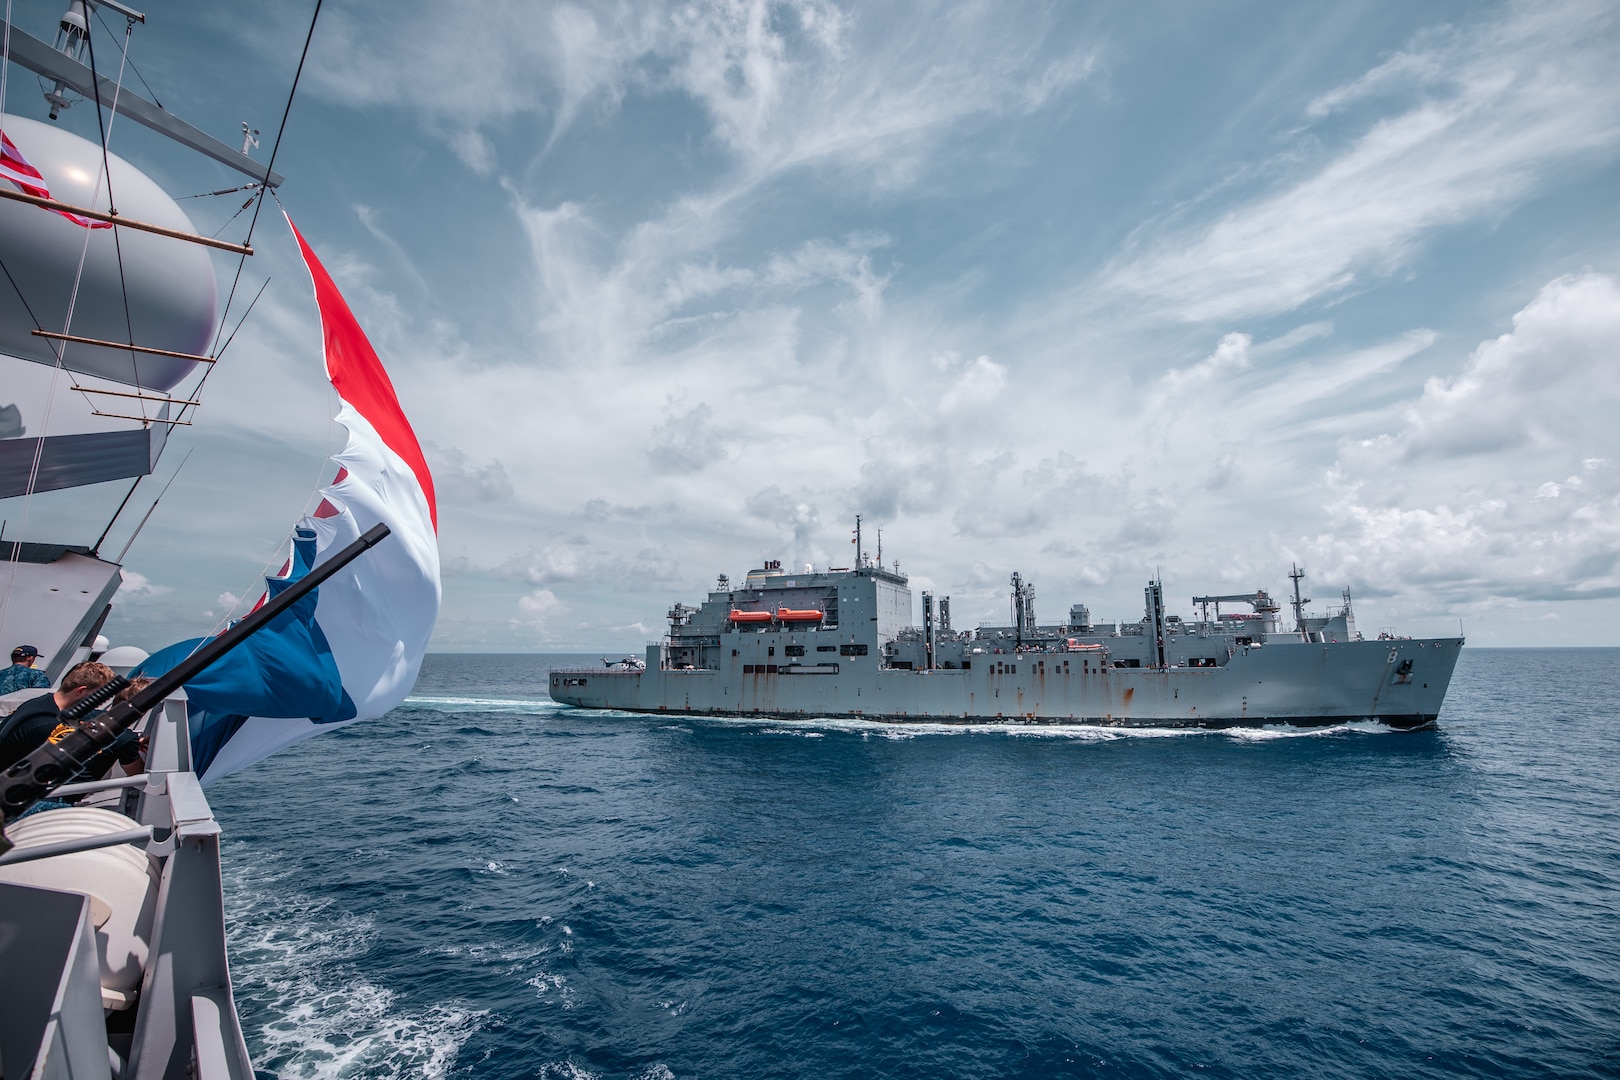 The right of free oceans and free passage for shipping is crucial to the global economy. With its presence in the Info-Pacific, HNLMS Tromp underlines the importance of free passage. In the region she works with partners who have common interests. Following the visit to Indonesia, HNLMS Tromp conducts a Replenishment At Sea with USNS Wally Schirra.